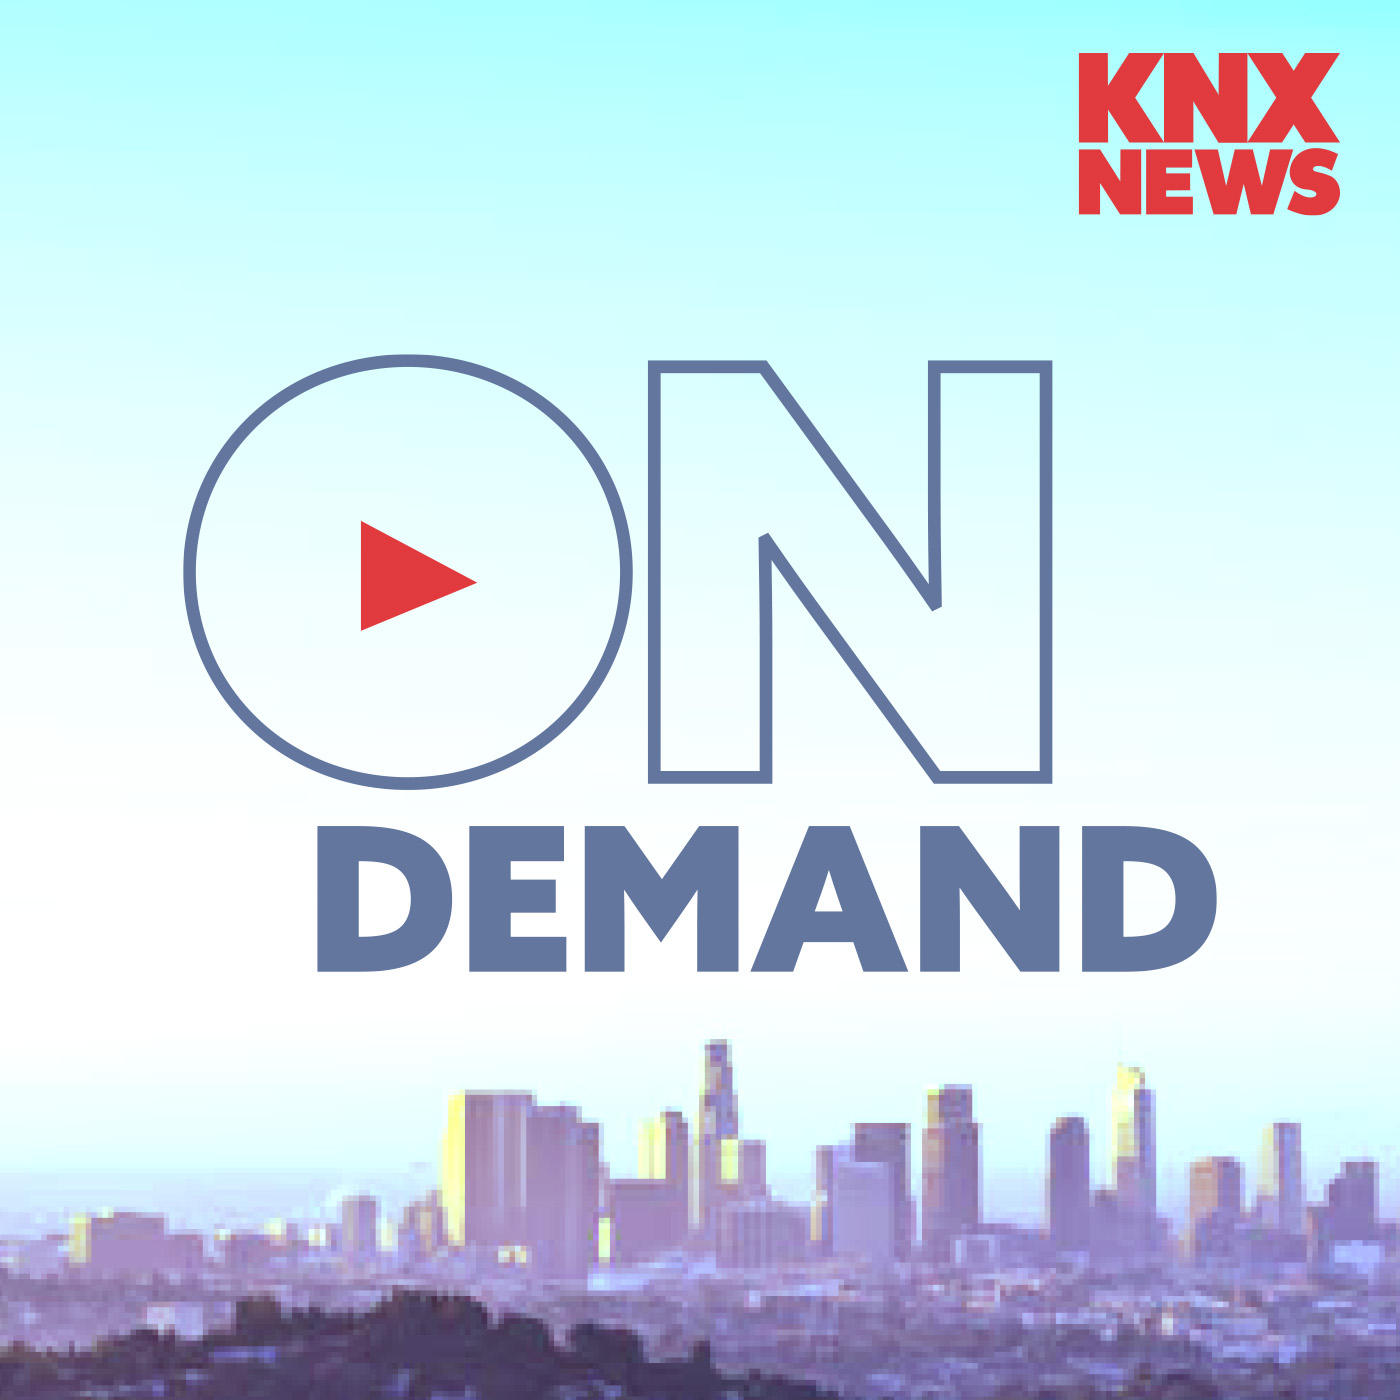 KNX BIG STORY: Why are the college protests spreading so quickly?